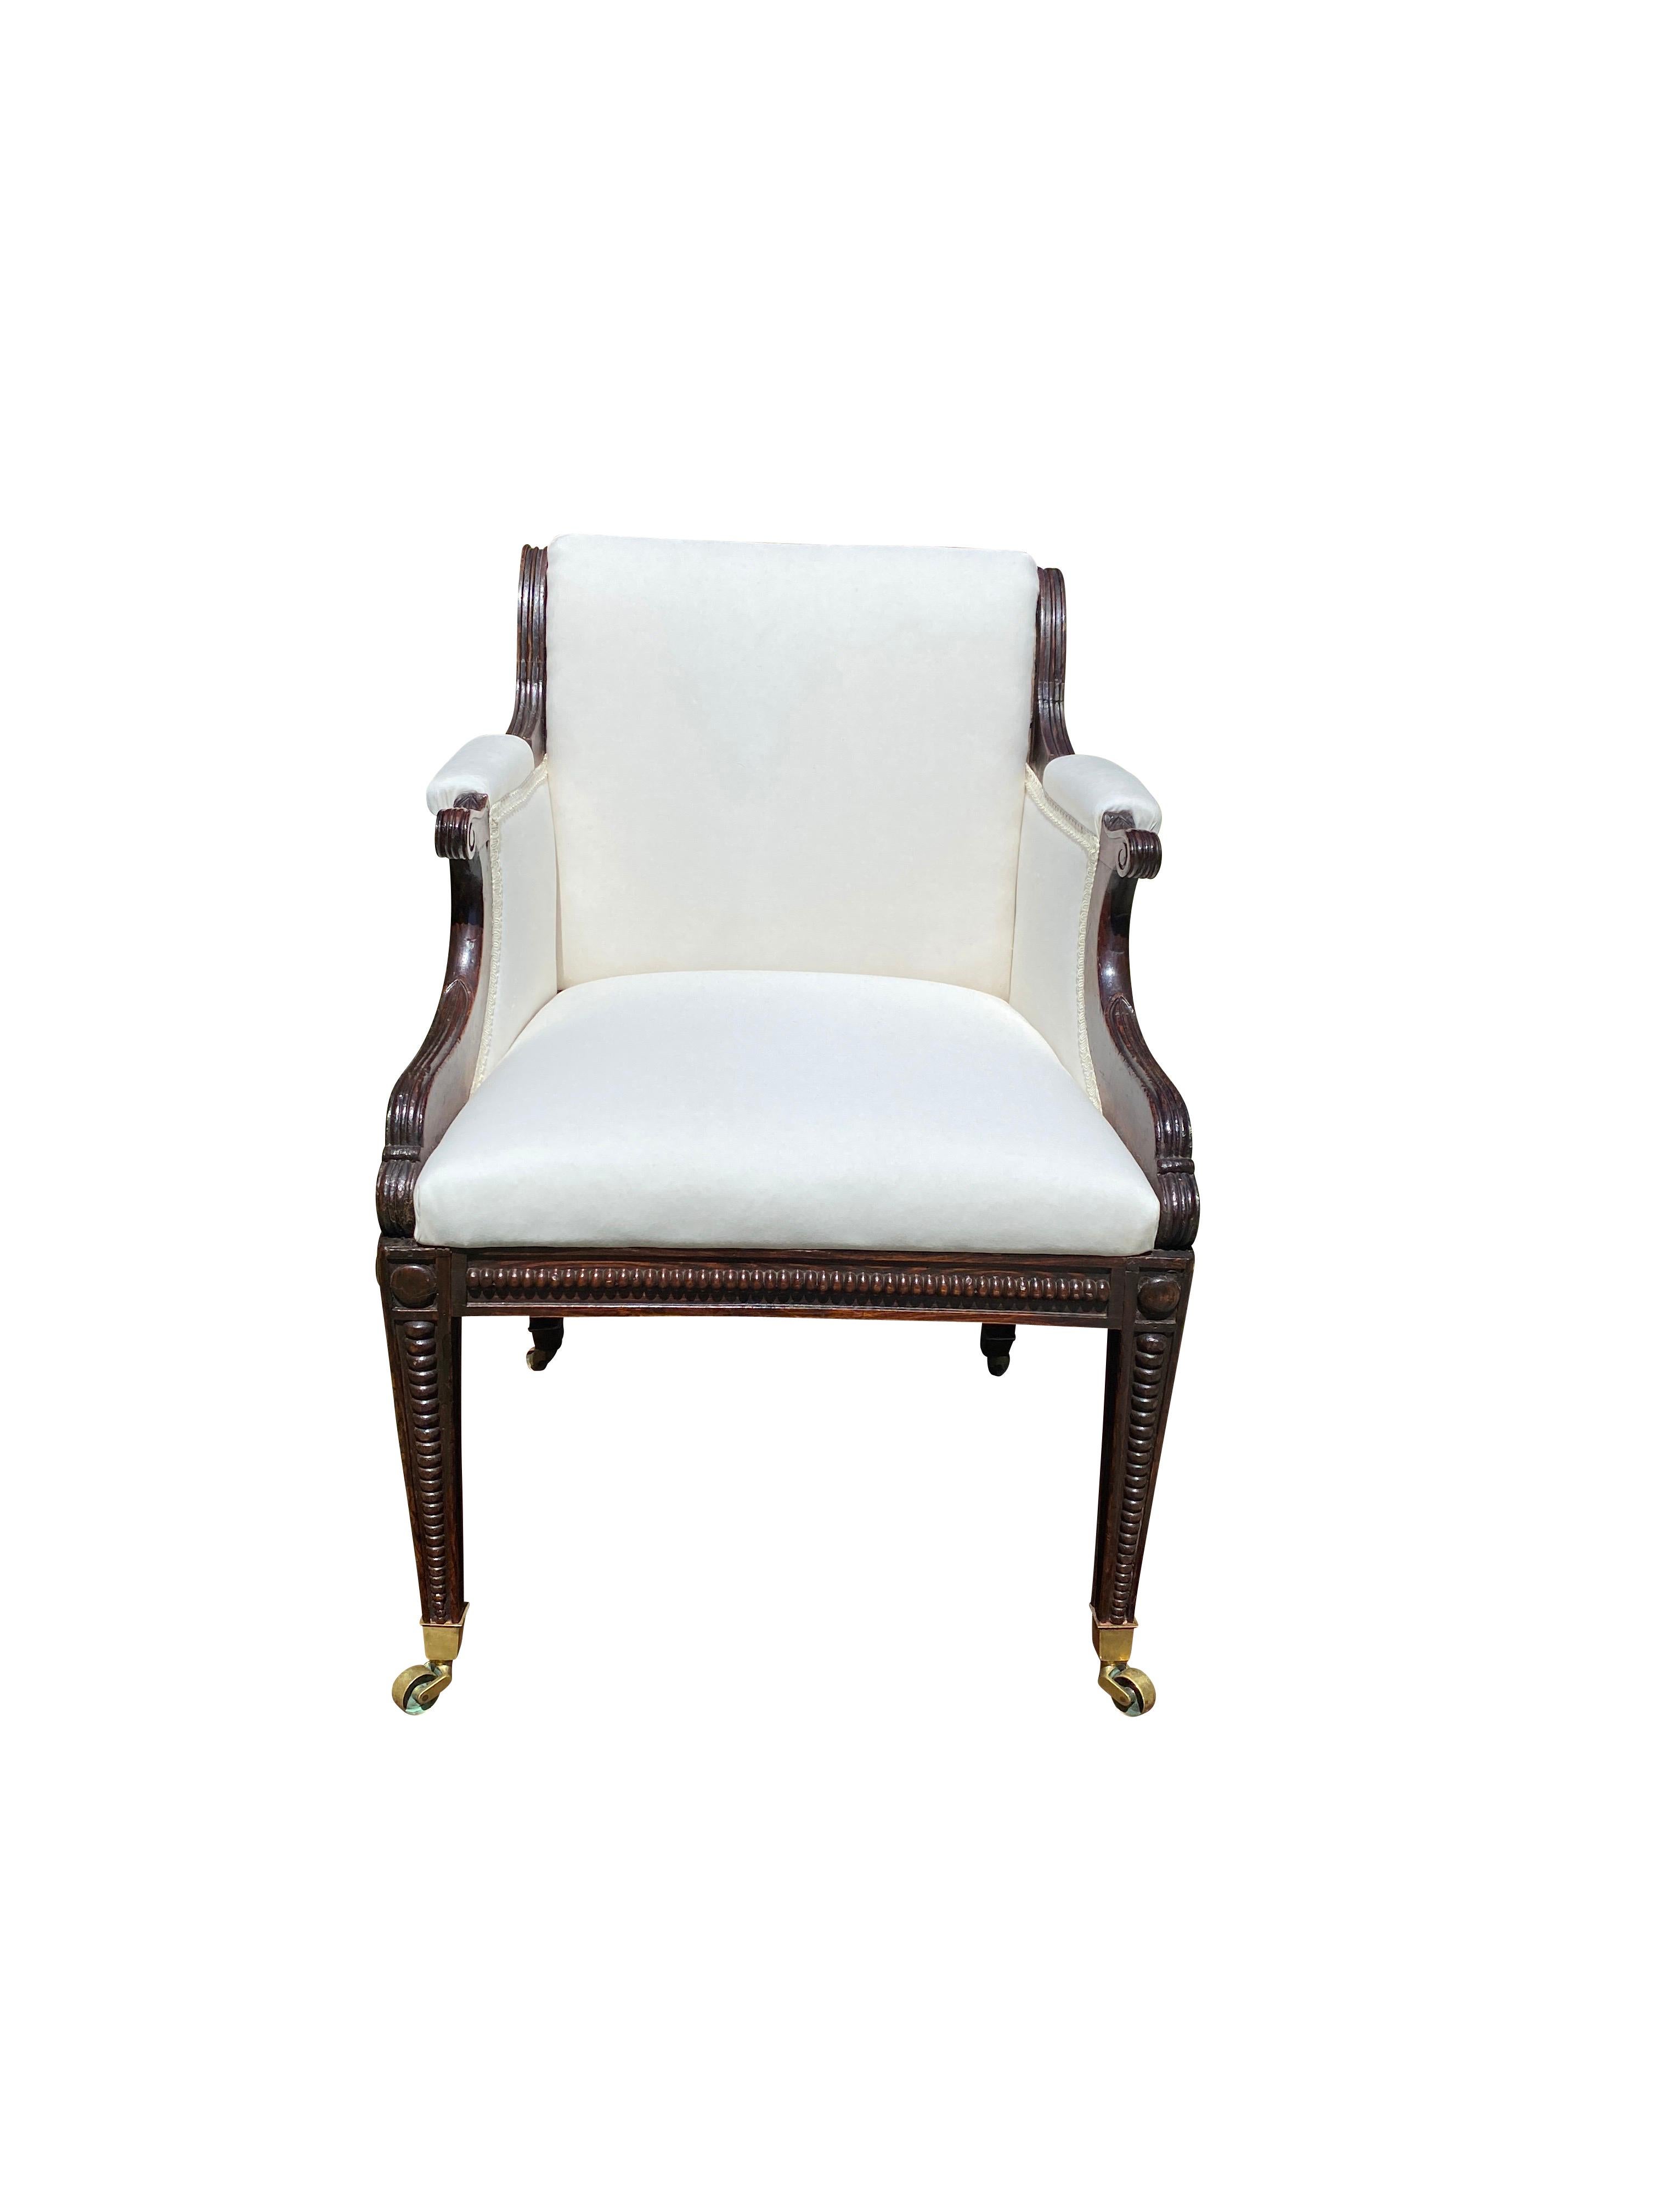 Of generous scale newly upholstered in muslin with scrolled back in the Greek revival style , nicely carved hand holds and chair frame with beaded carved decoration raised on square tapered legs with beaded carving , casters. This was designer